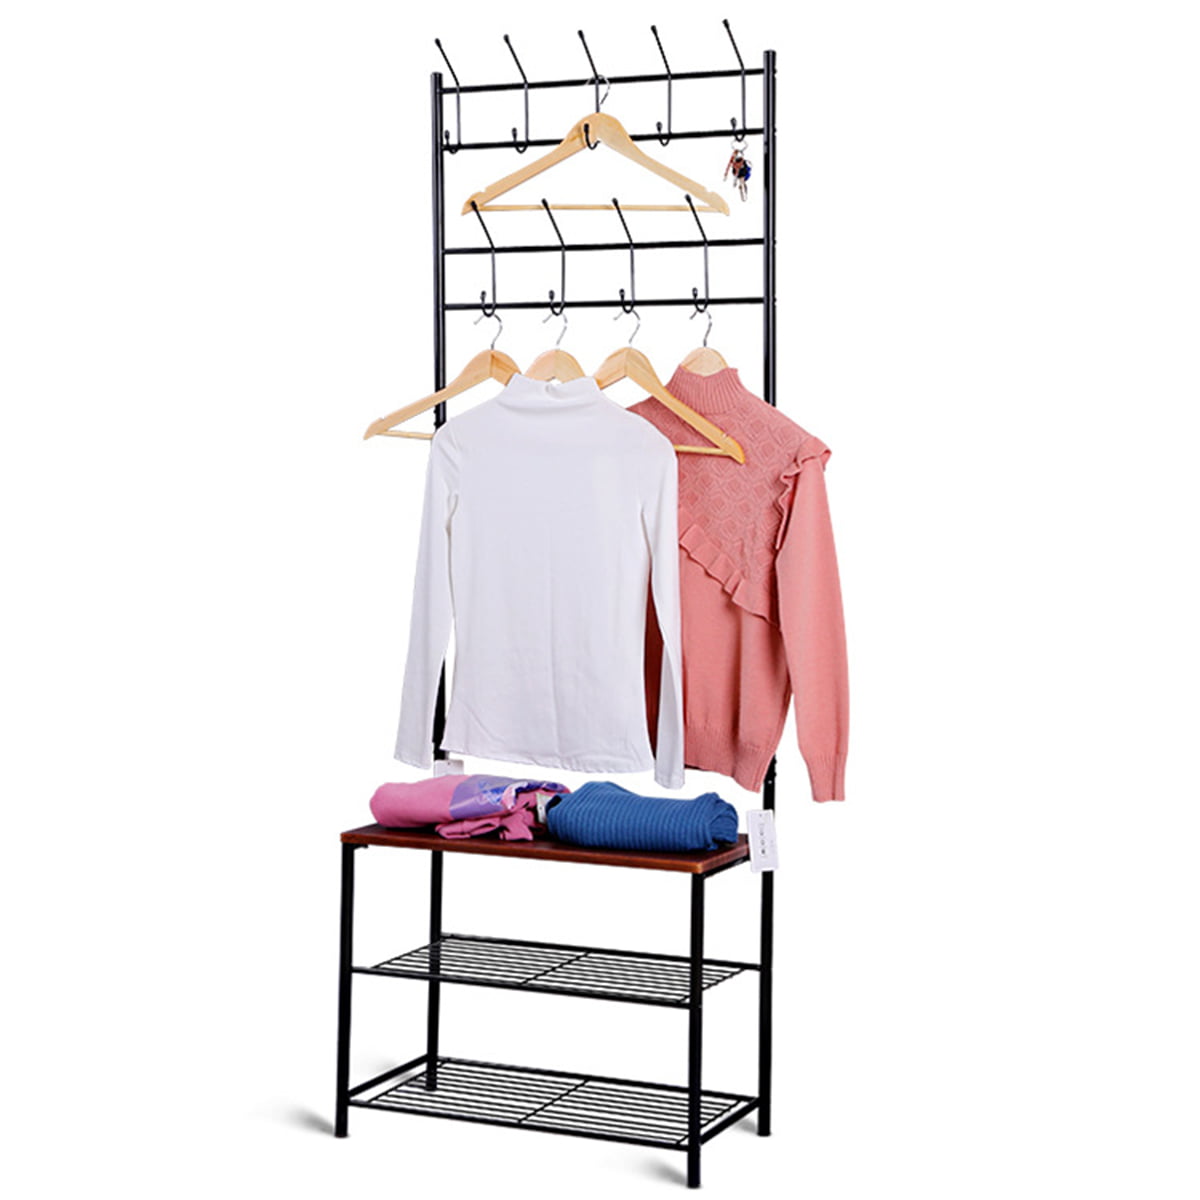 Details about   Creative Pool Ball Coat Hanger Wall Mounted Clothes Rack for Home Bar Clubs